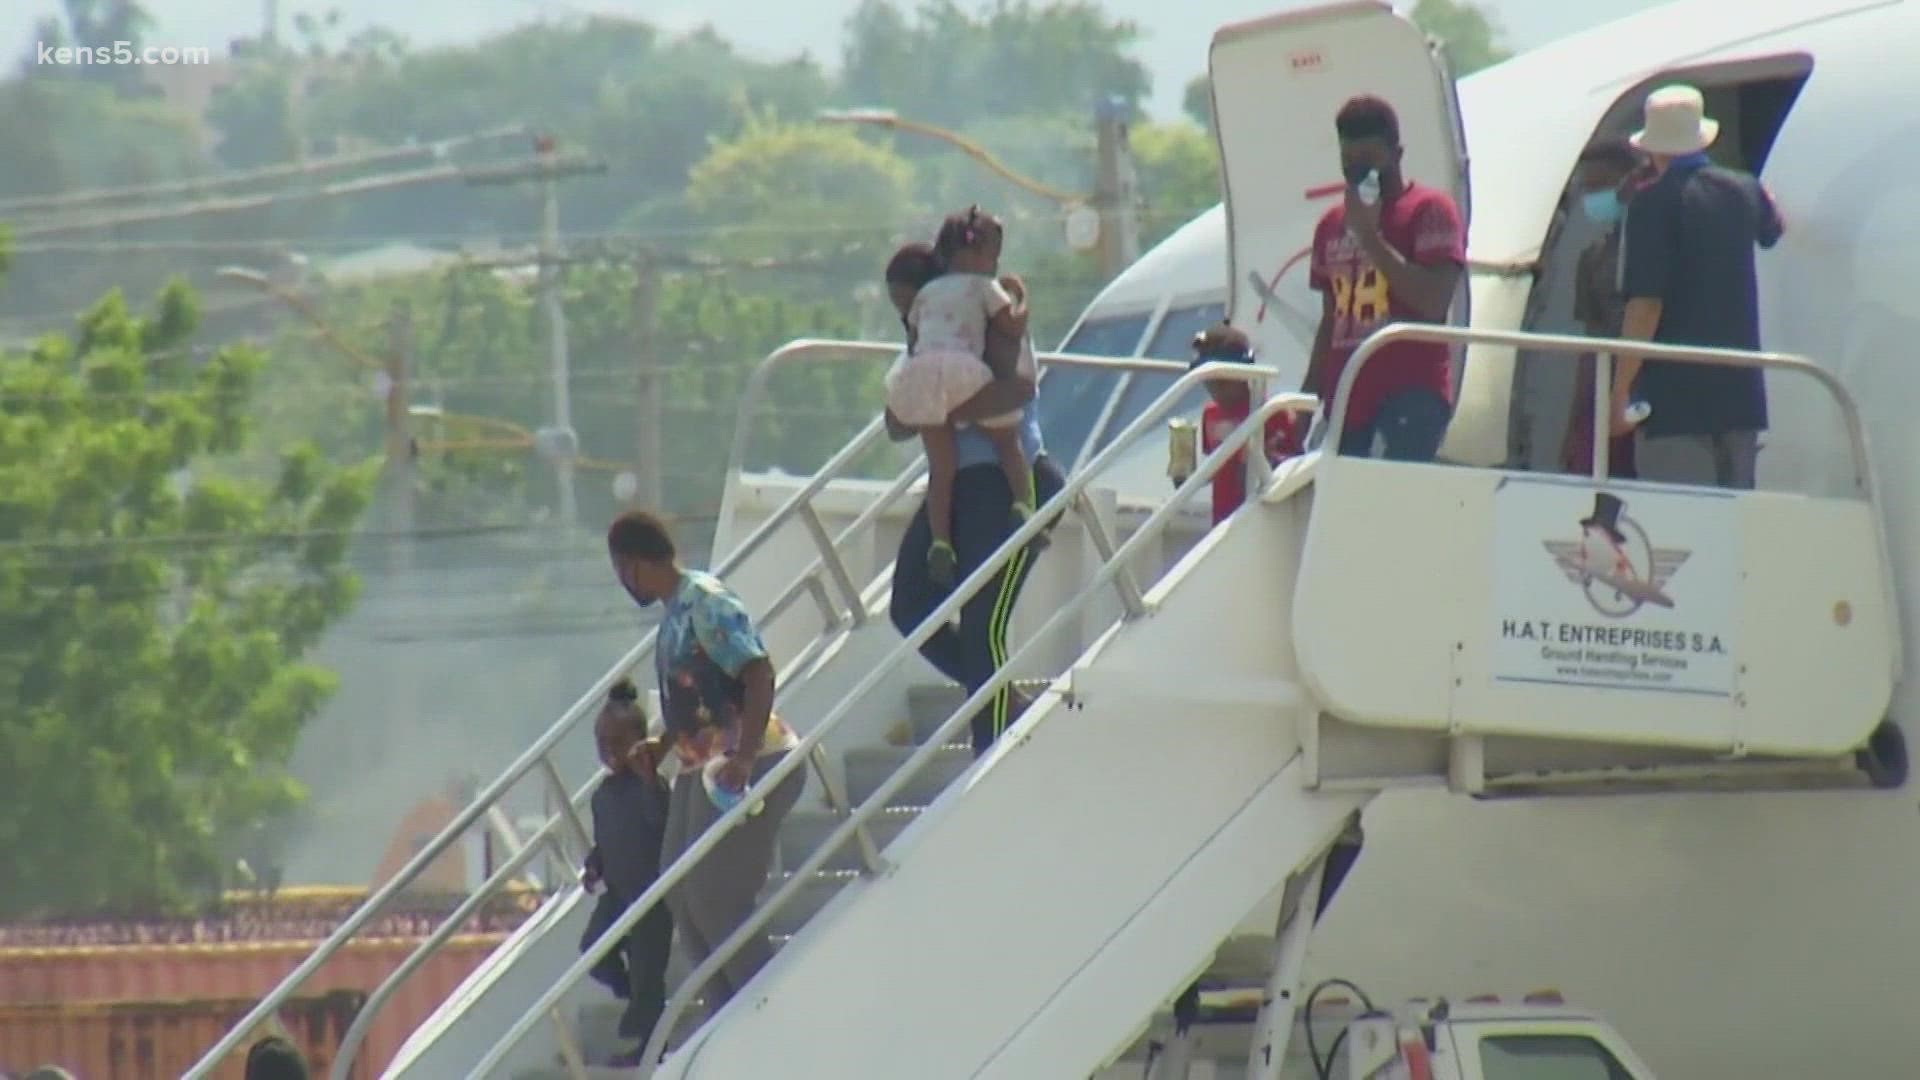 There are still about 12,000 migrants in Del Rio waiting to be flown back to Haiti, officials said.